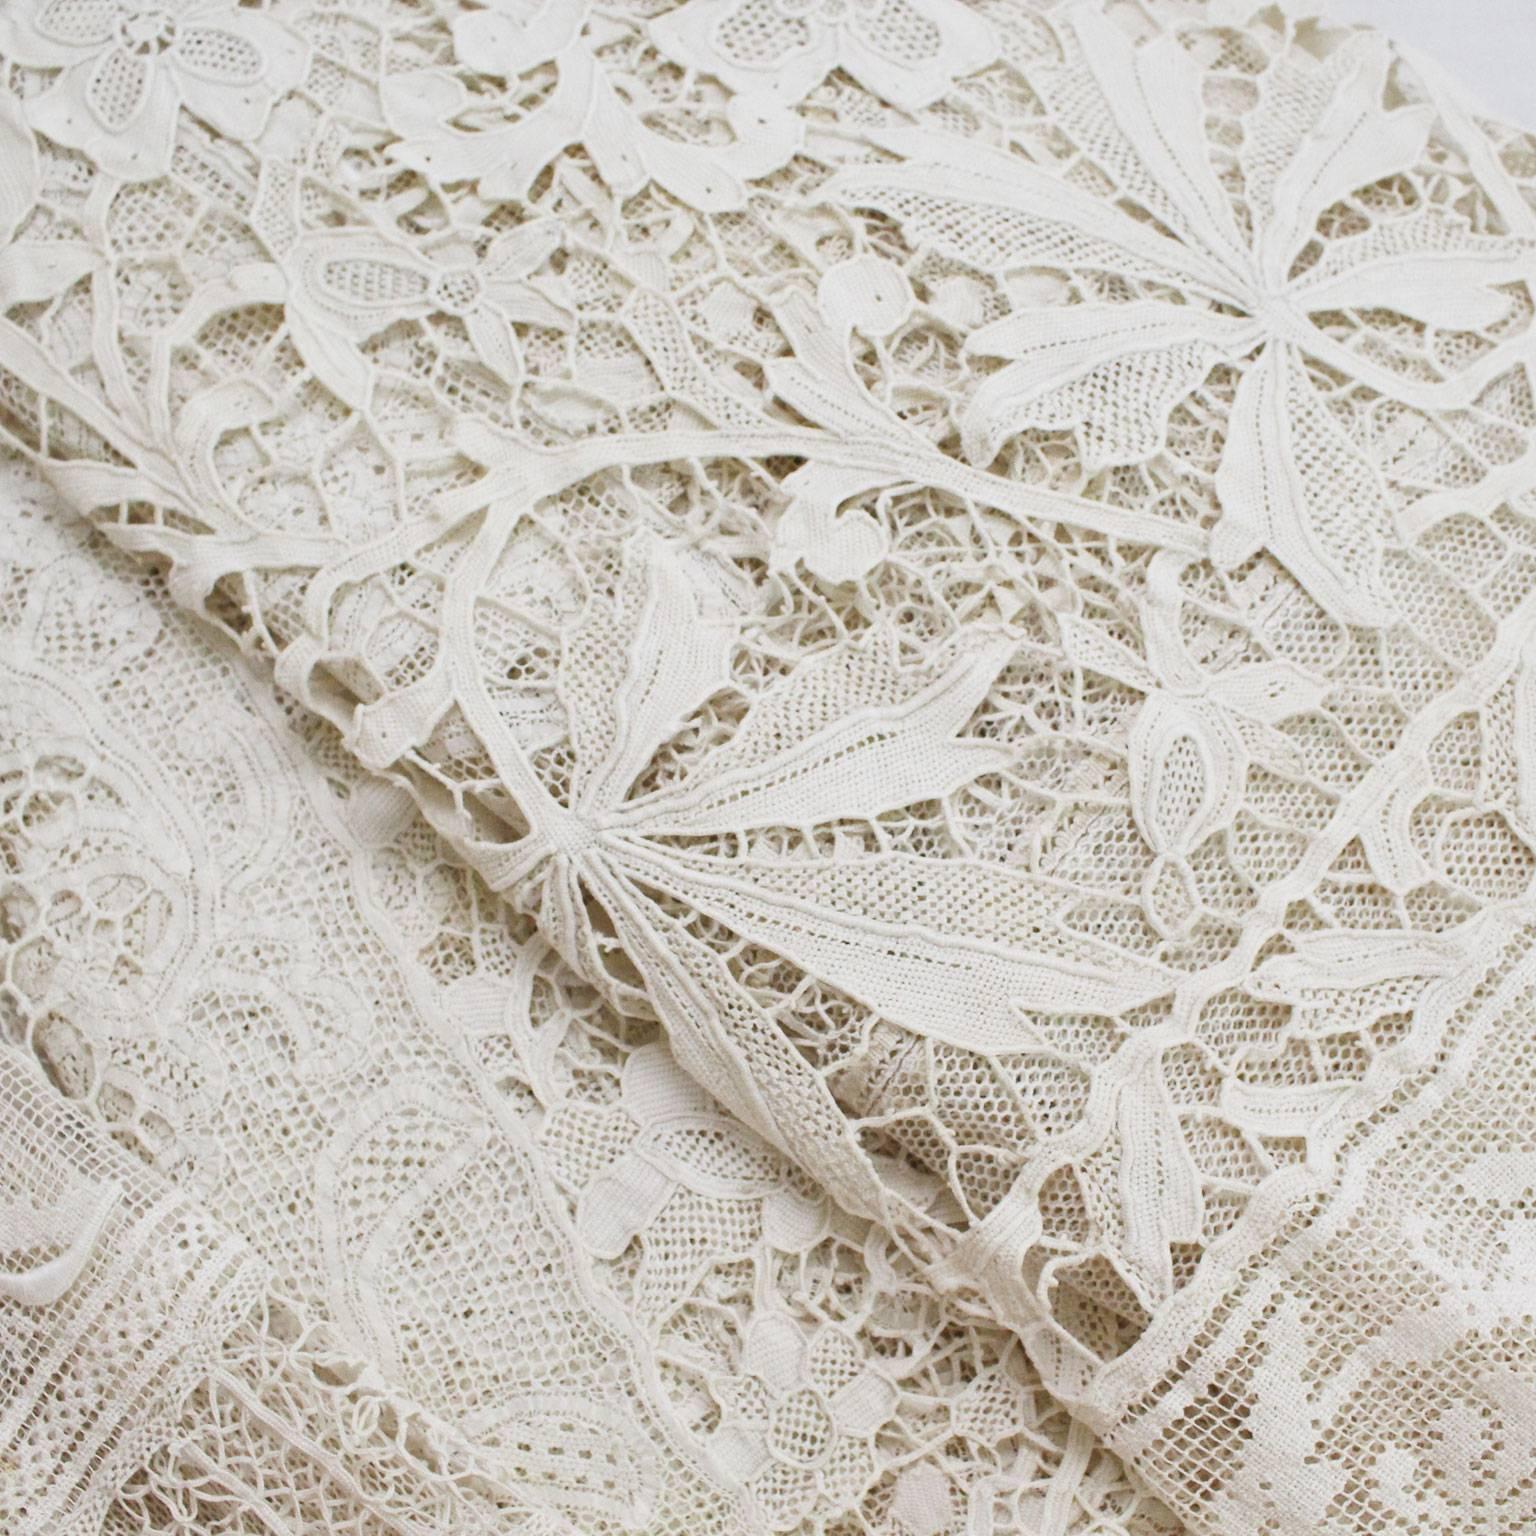 This pair of ivory curtains is so beautiful it is almost impossible to describe, they are particularly difficult to photograph. Each element was hand-sewn, they would literally have taken months to make. The quality of the work is exceptional. Here